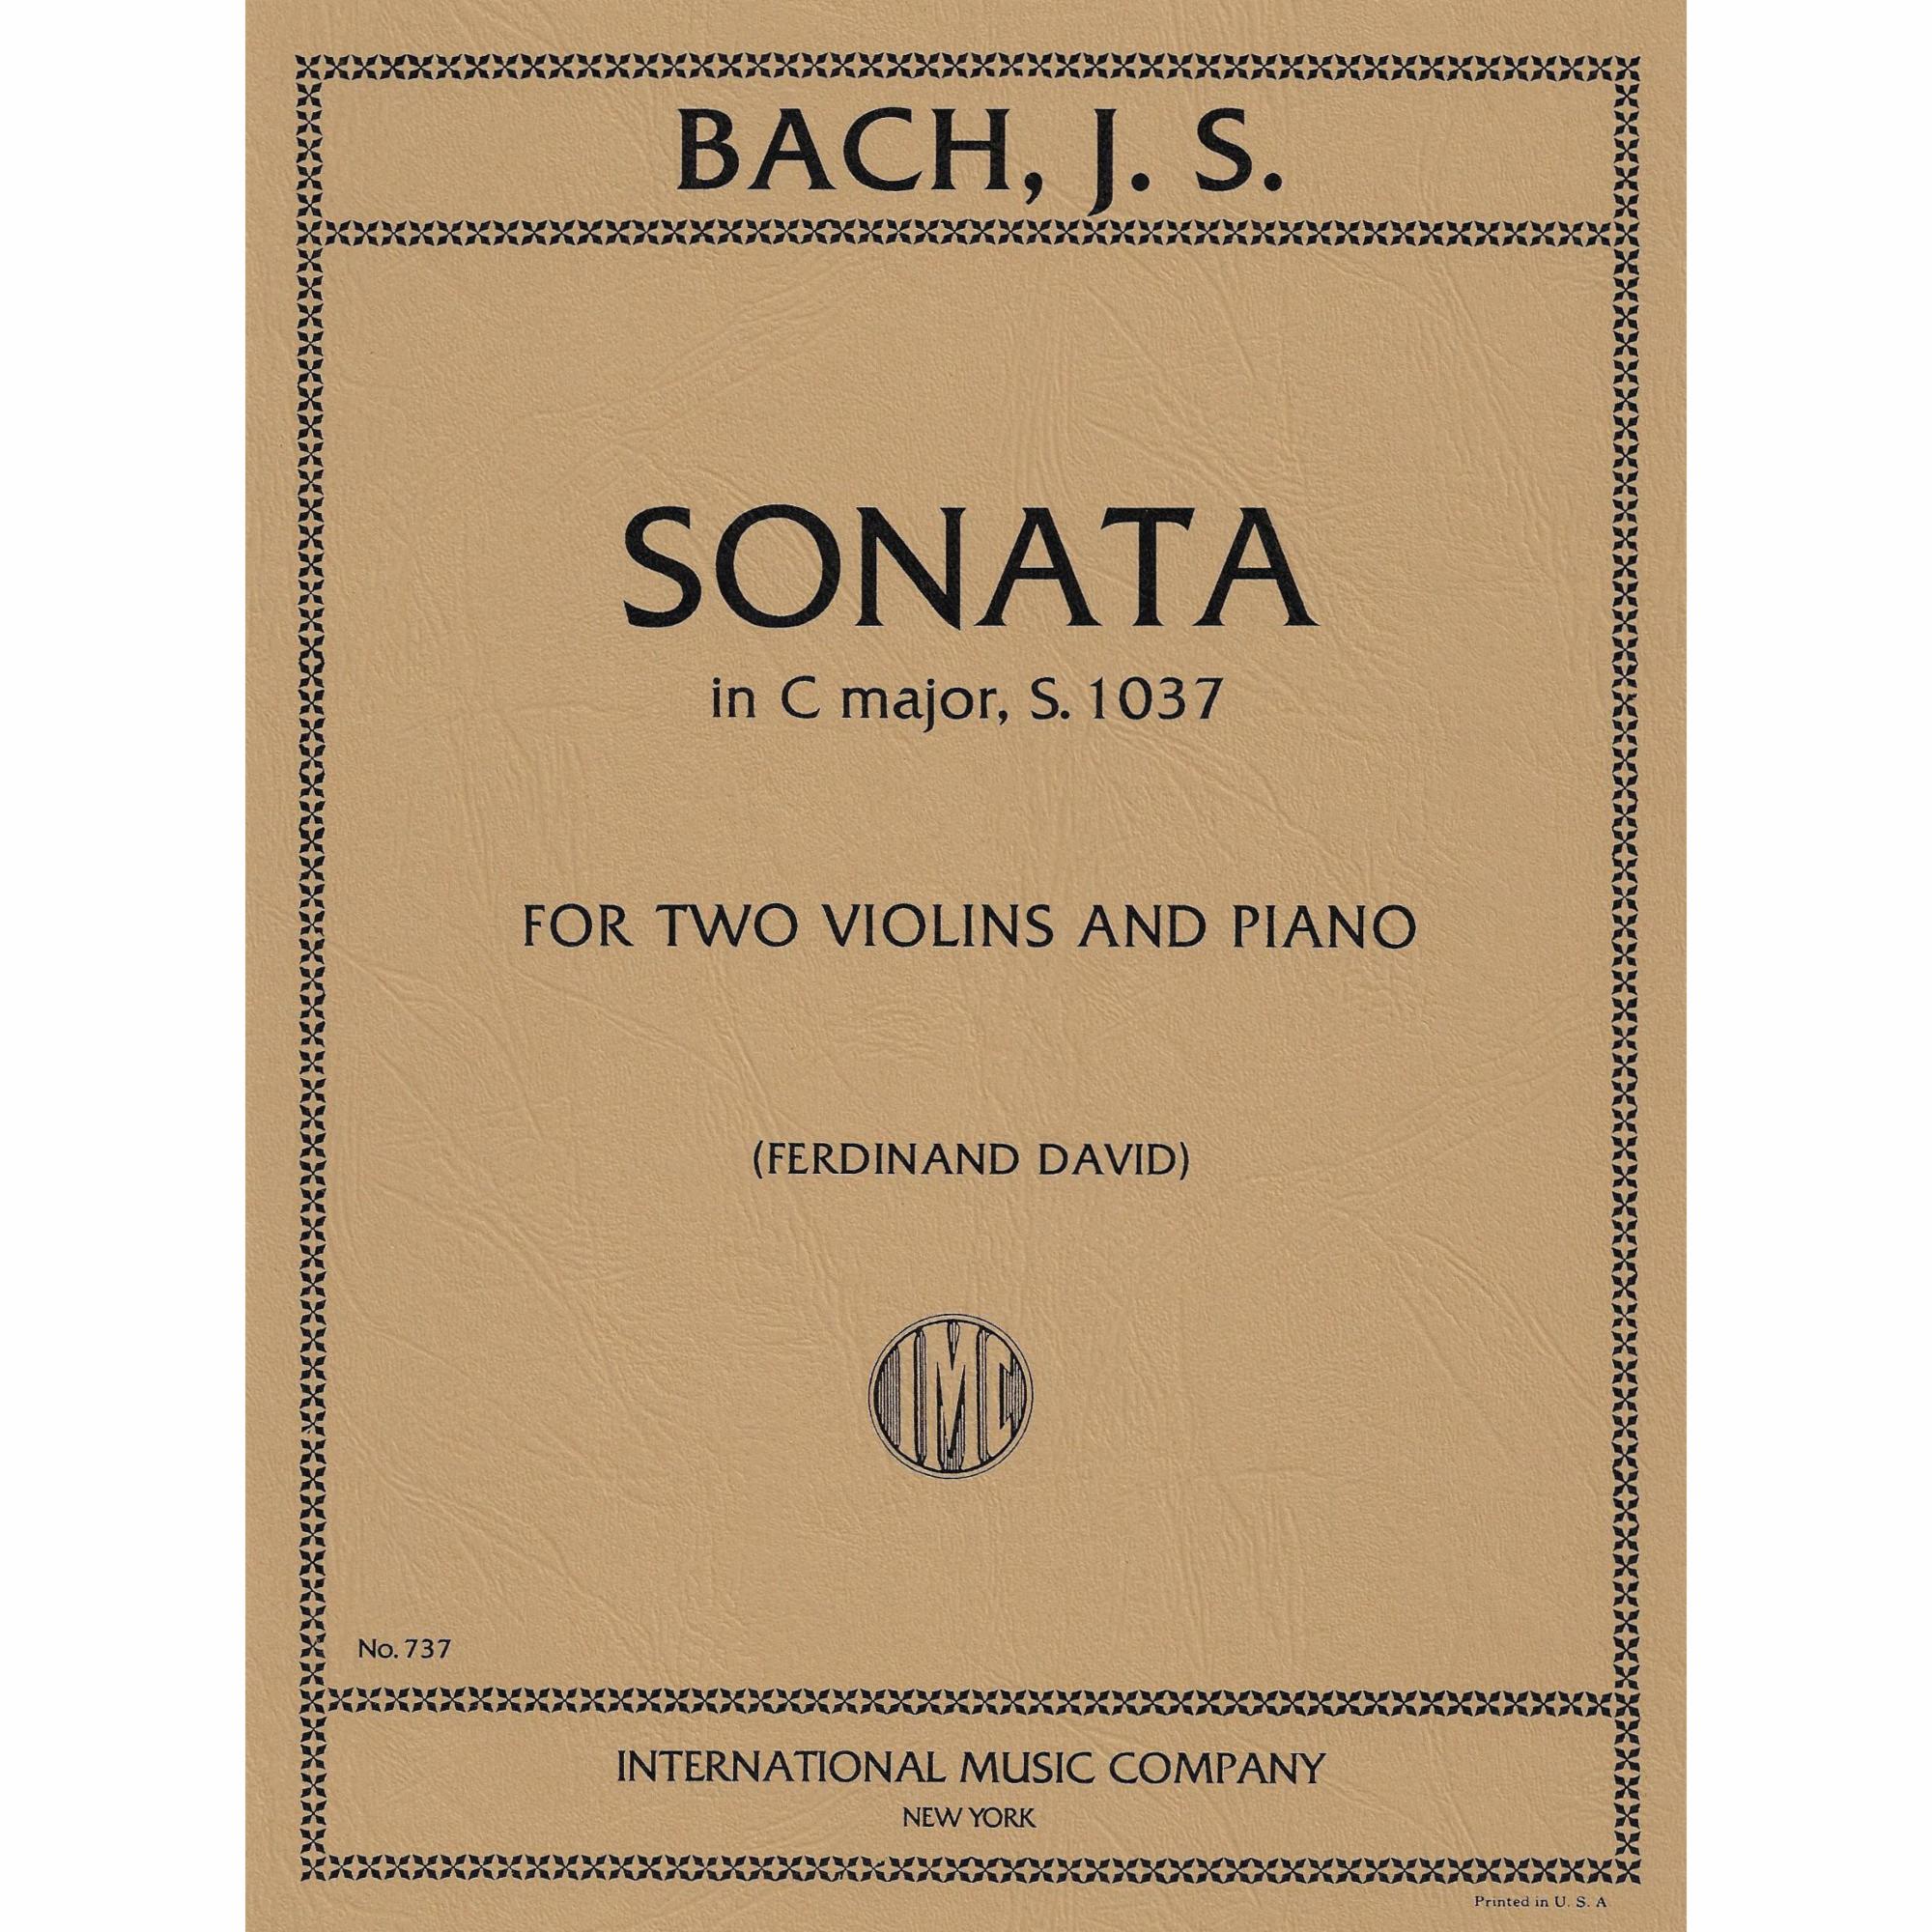 Bach -- Sonata in C Major, S. 1037 for Two Violins and Piano